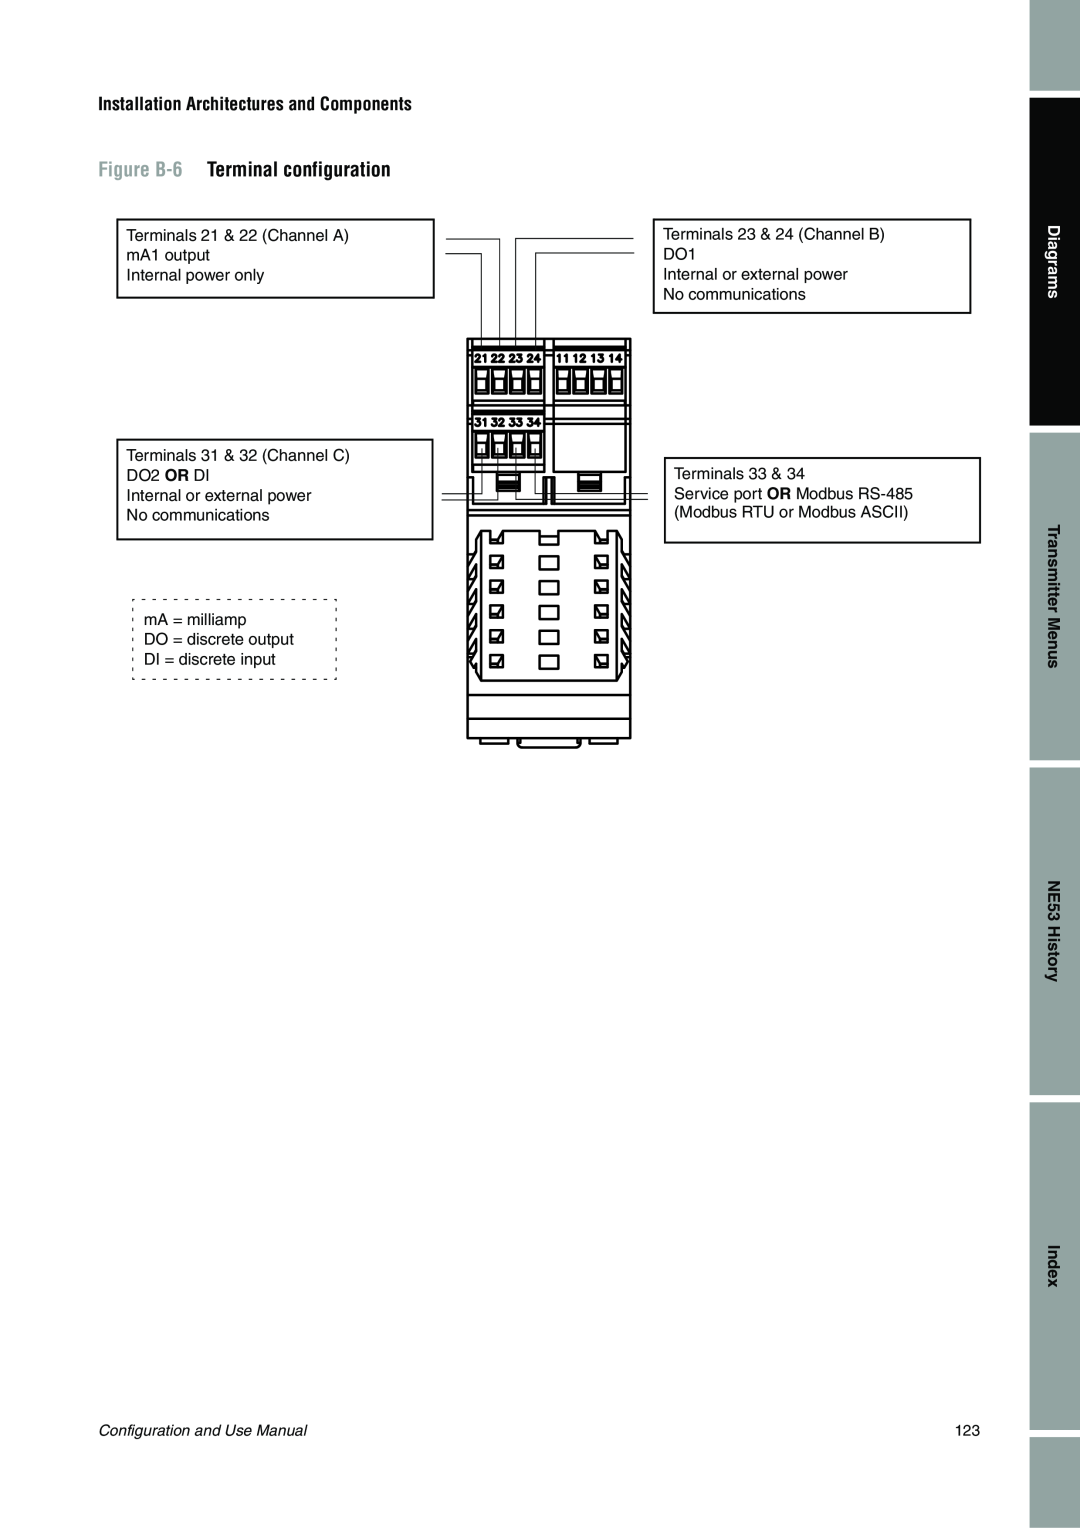 Emerson Process Management 1500 Figure B-6 Terminal configuration, Installation Architectures and Components, Diagrams 